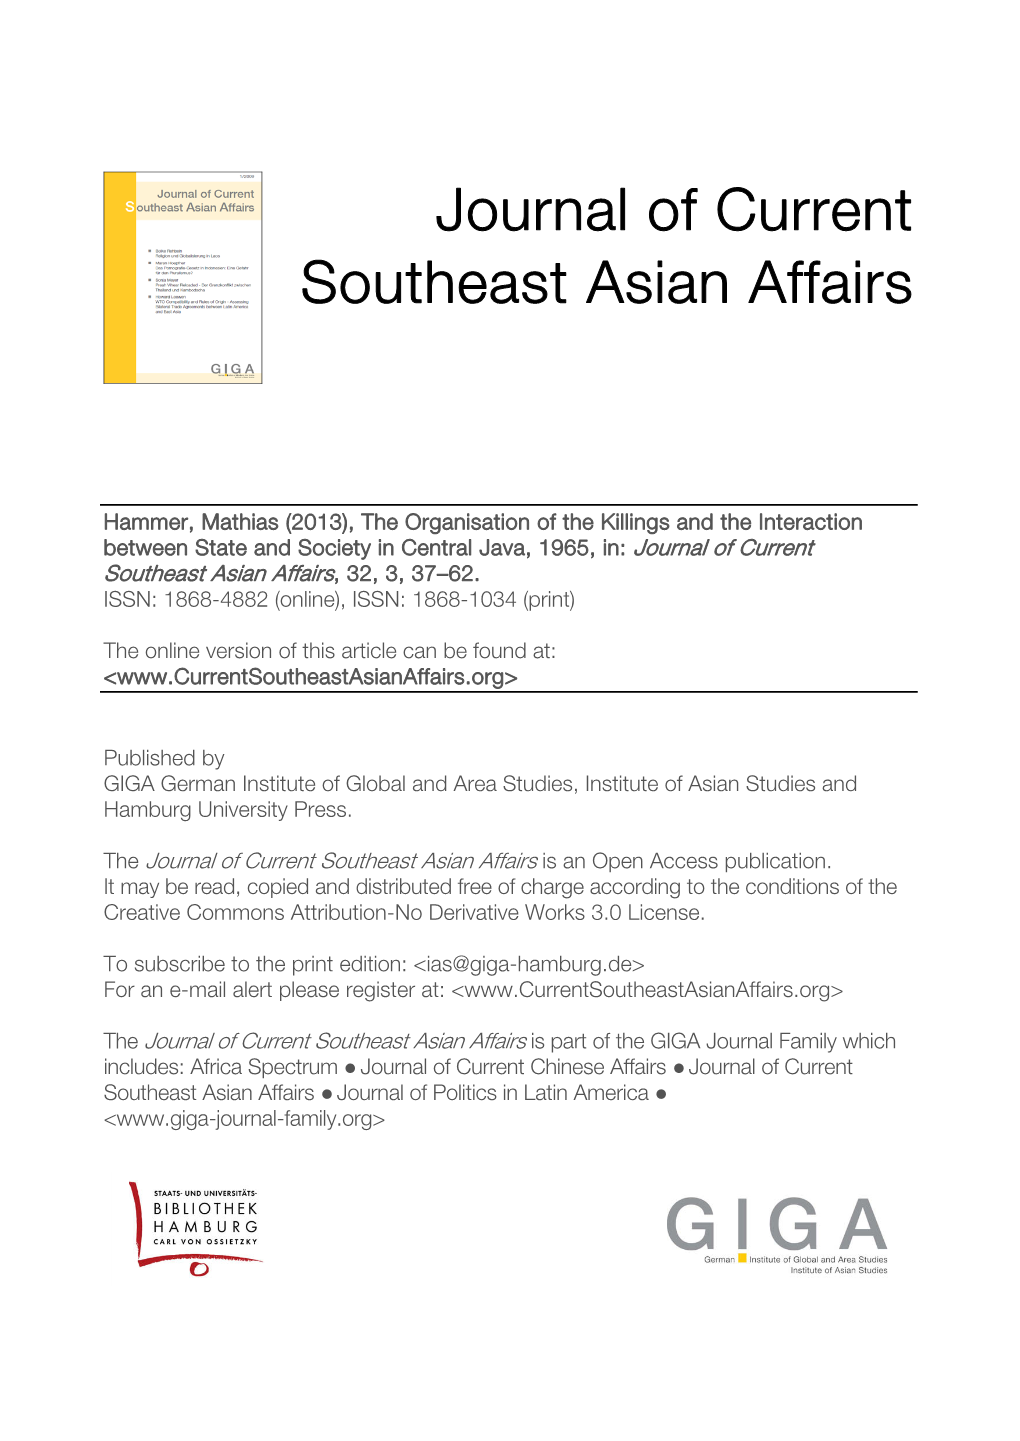 The Organisation of the Killings and the Interaction Between State and Society in Central Java, 1965, In: Journal of Current Southeast Asian Affairs, 32, 3, 37–62